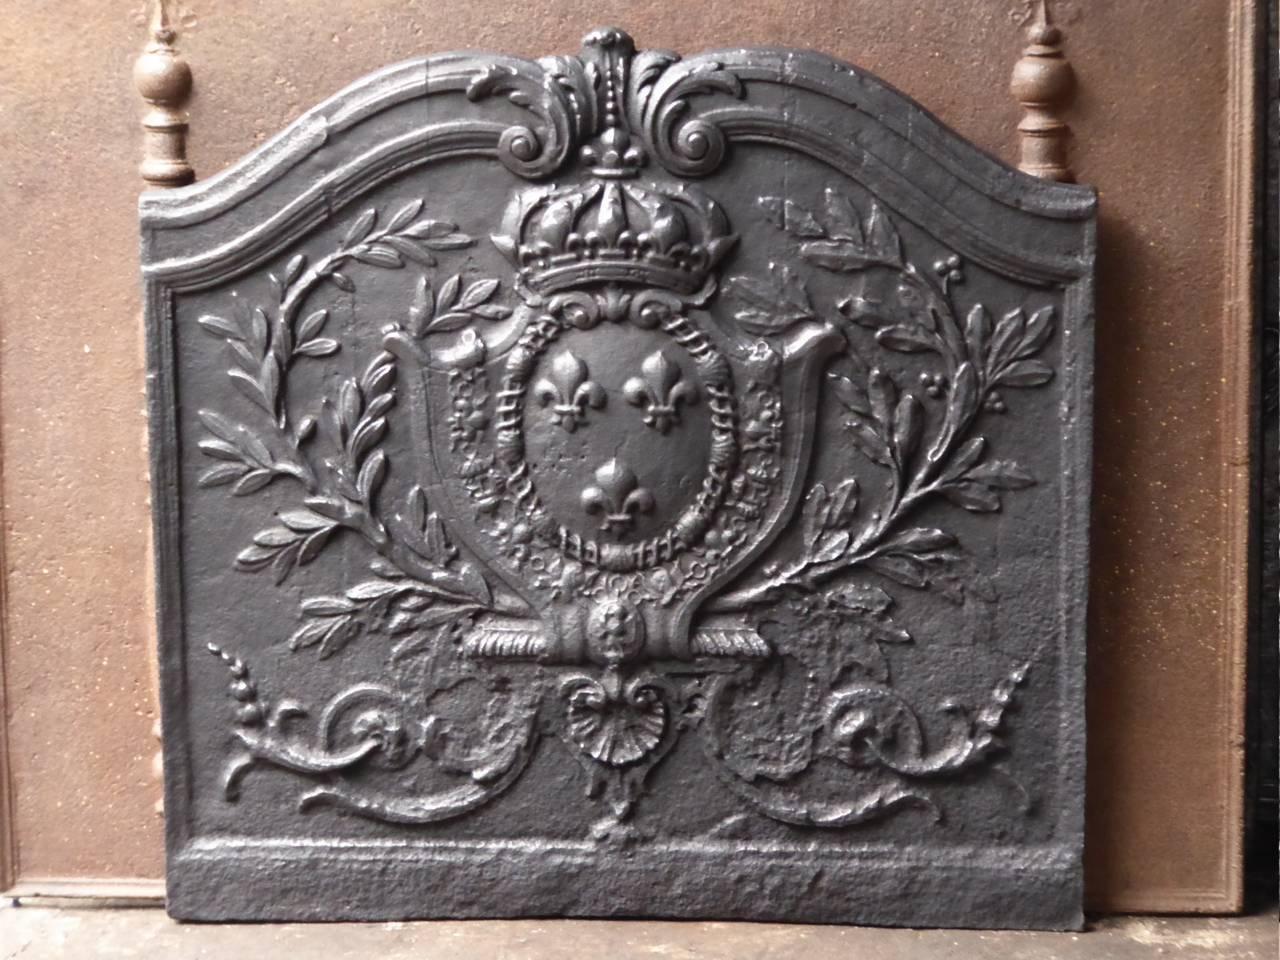 18th century French fireplace fireback with the Arms of France. Coat of arms of the House of Bourbon, an originally French royal house that became a major dynasty in Europe. It delivered kings for Spain (Navarra), France, both Sicilies and Parma.